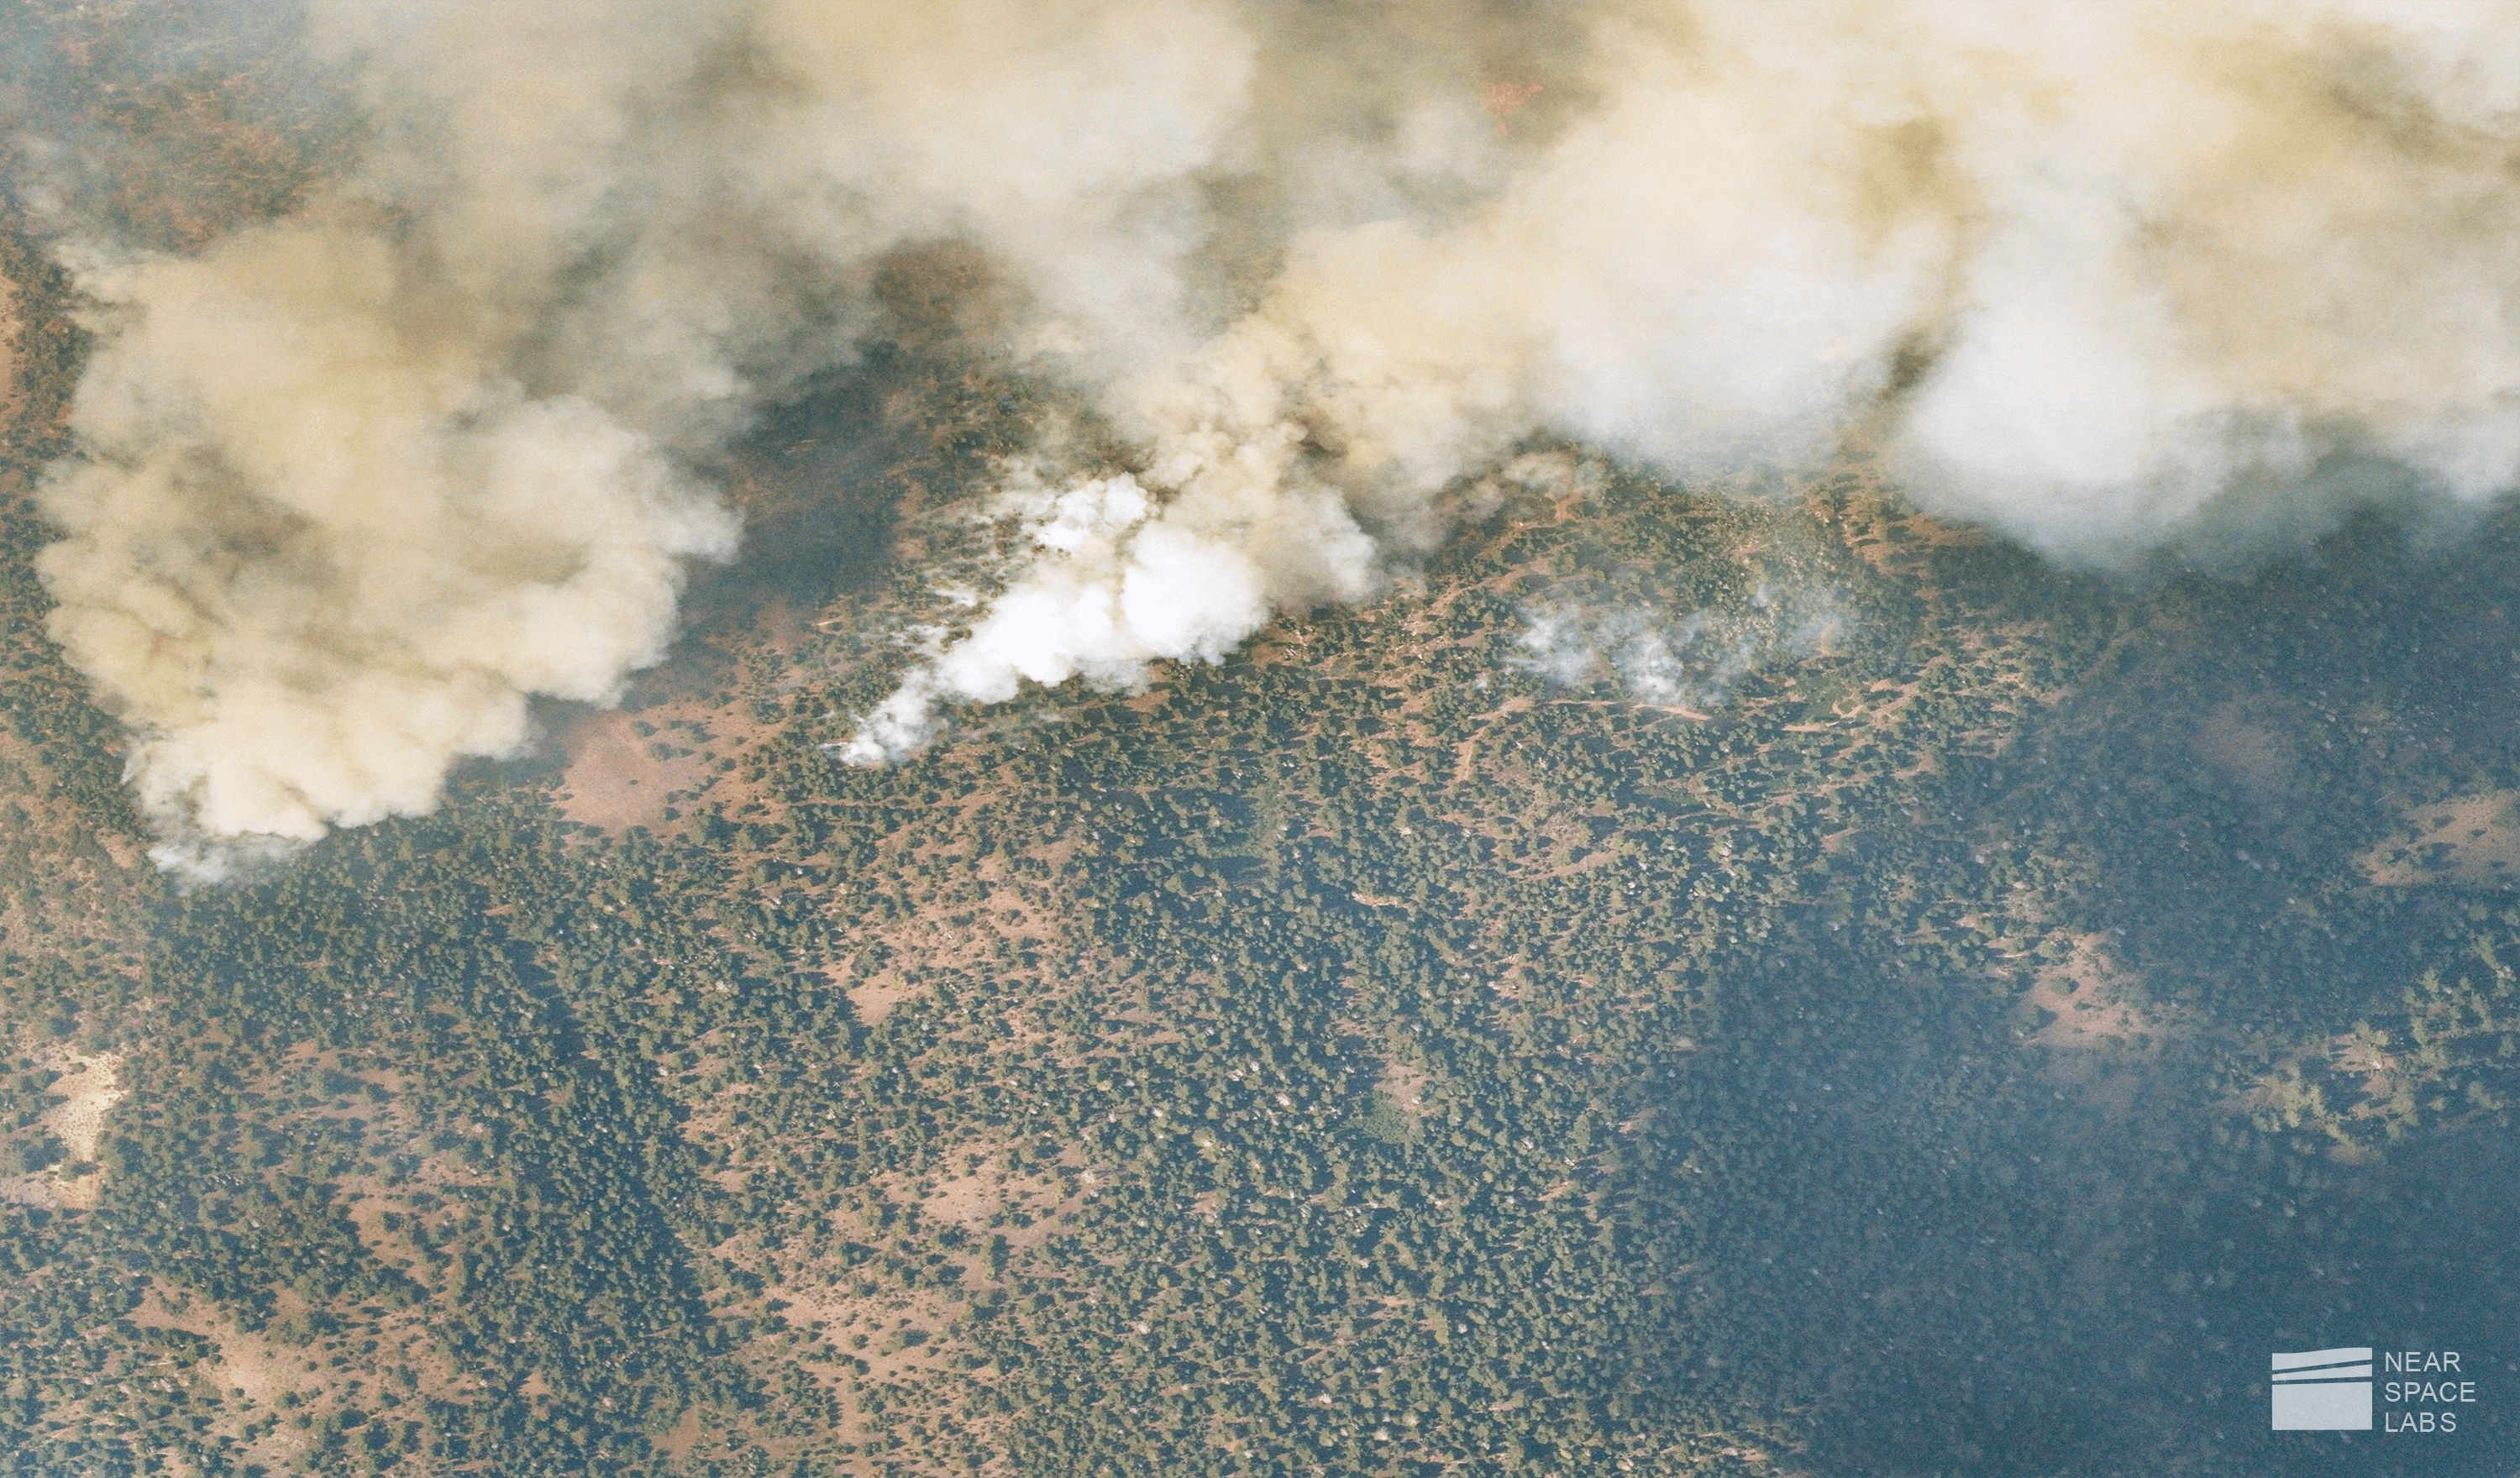 Near Space Labs 30 cm capture of Tamarack Wildfires 